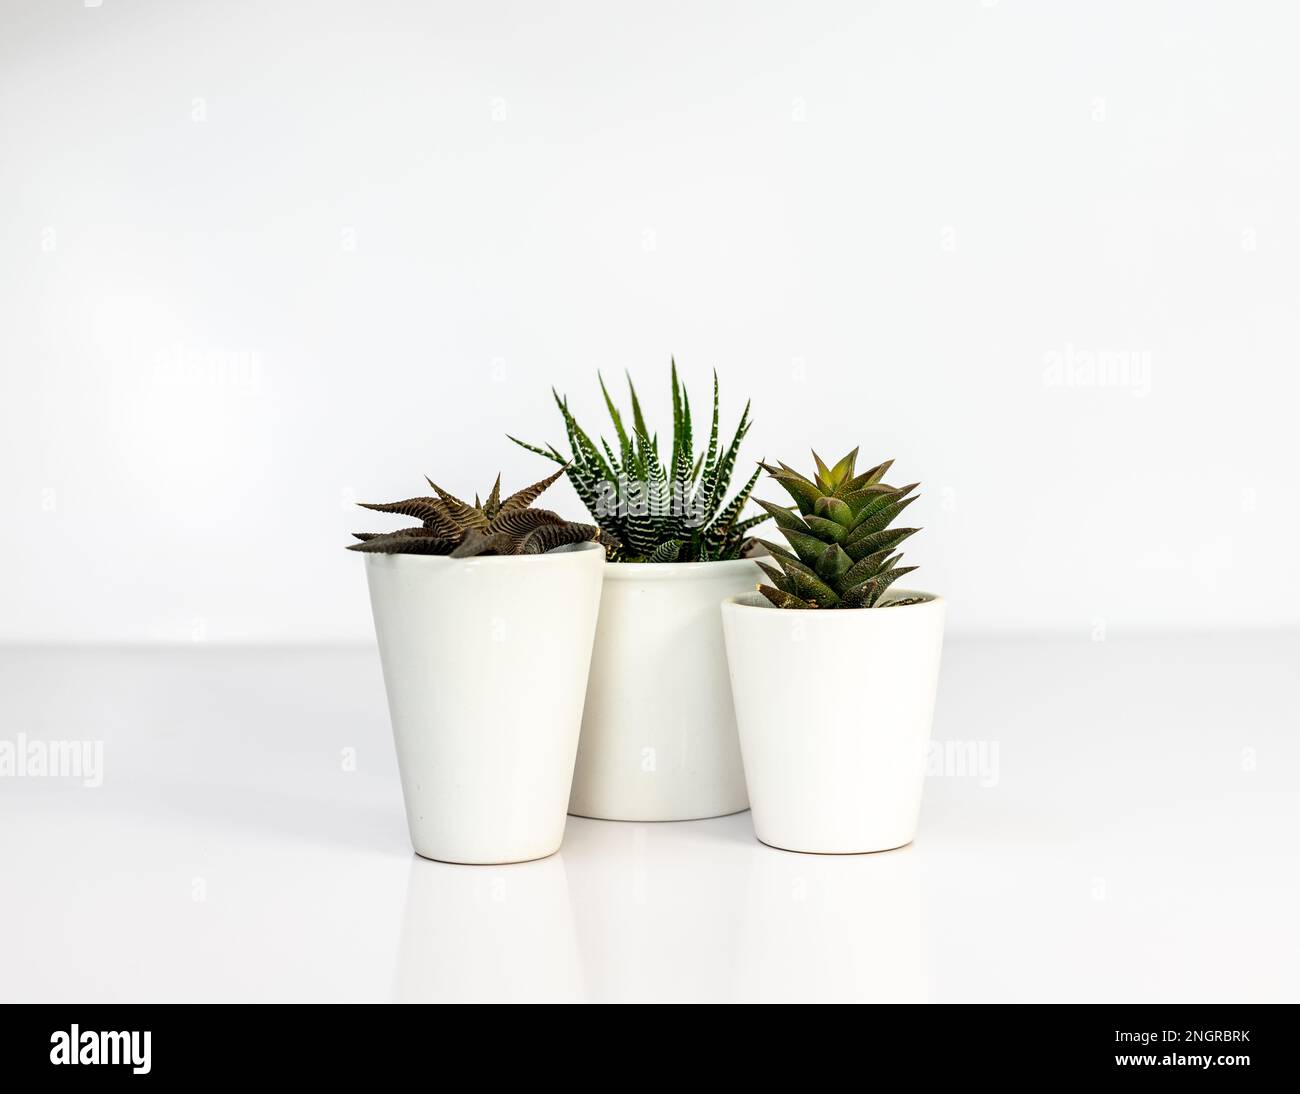 Hawothia succulents in cute white pots isolated on white background Stock Photo